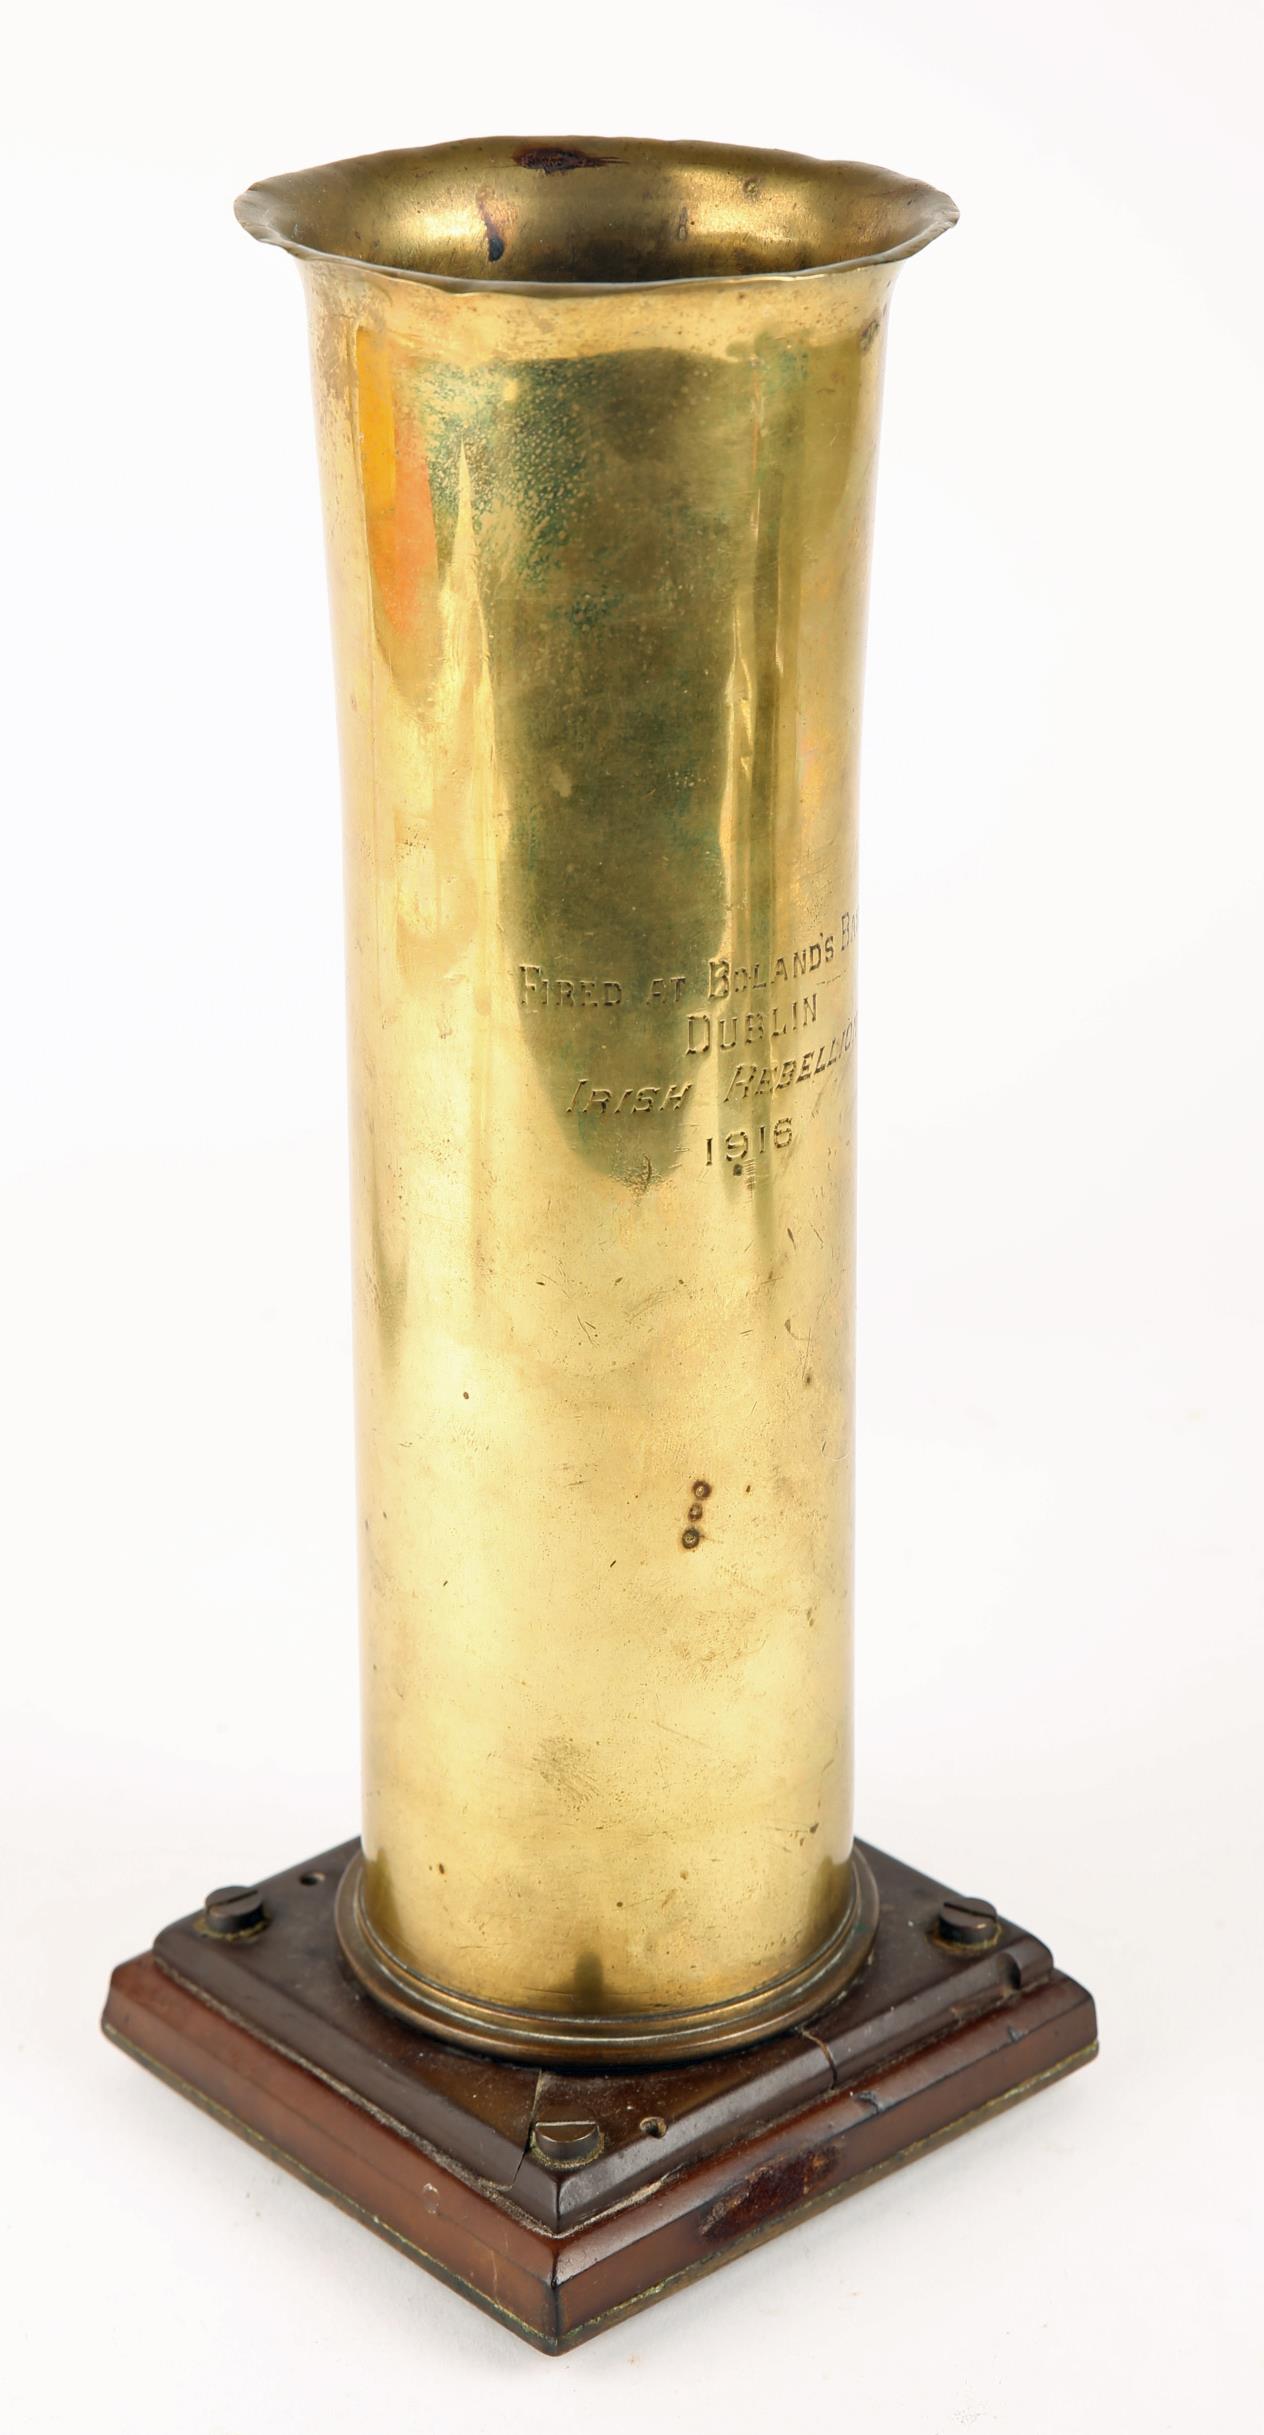 Easter Rising 1916. A brass artillery shell case engraved "Fired at Boland's Bakers - Dublin - Irish